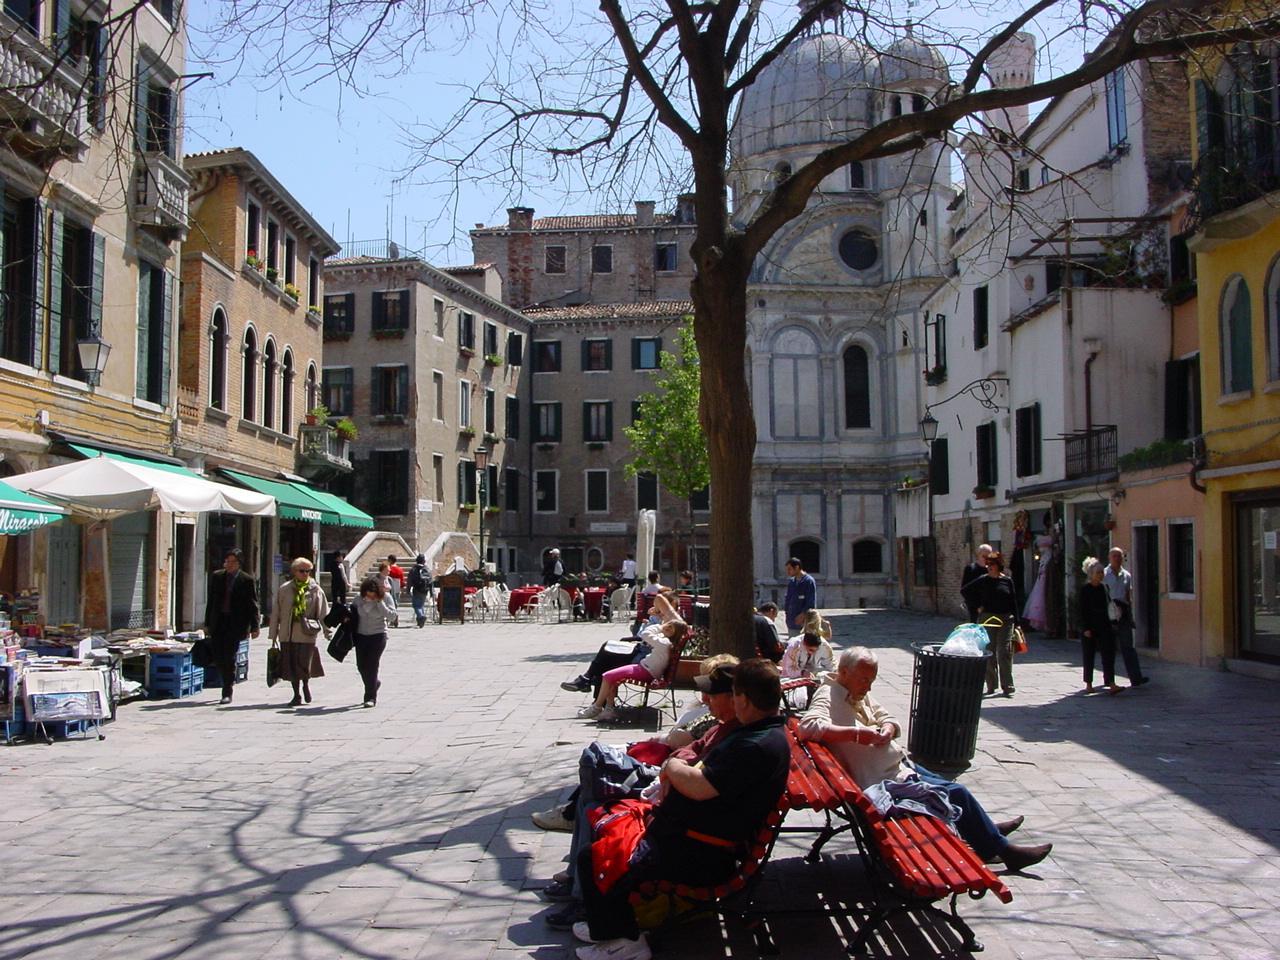 Square meals: after another restaurant rip-off, more tourists in Venice may opt for picnics